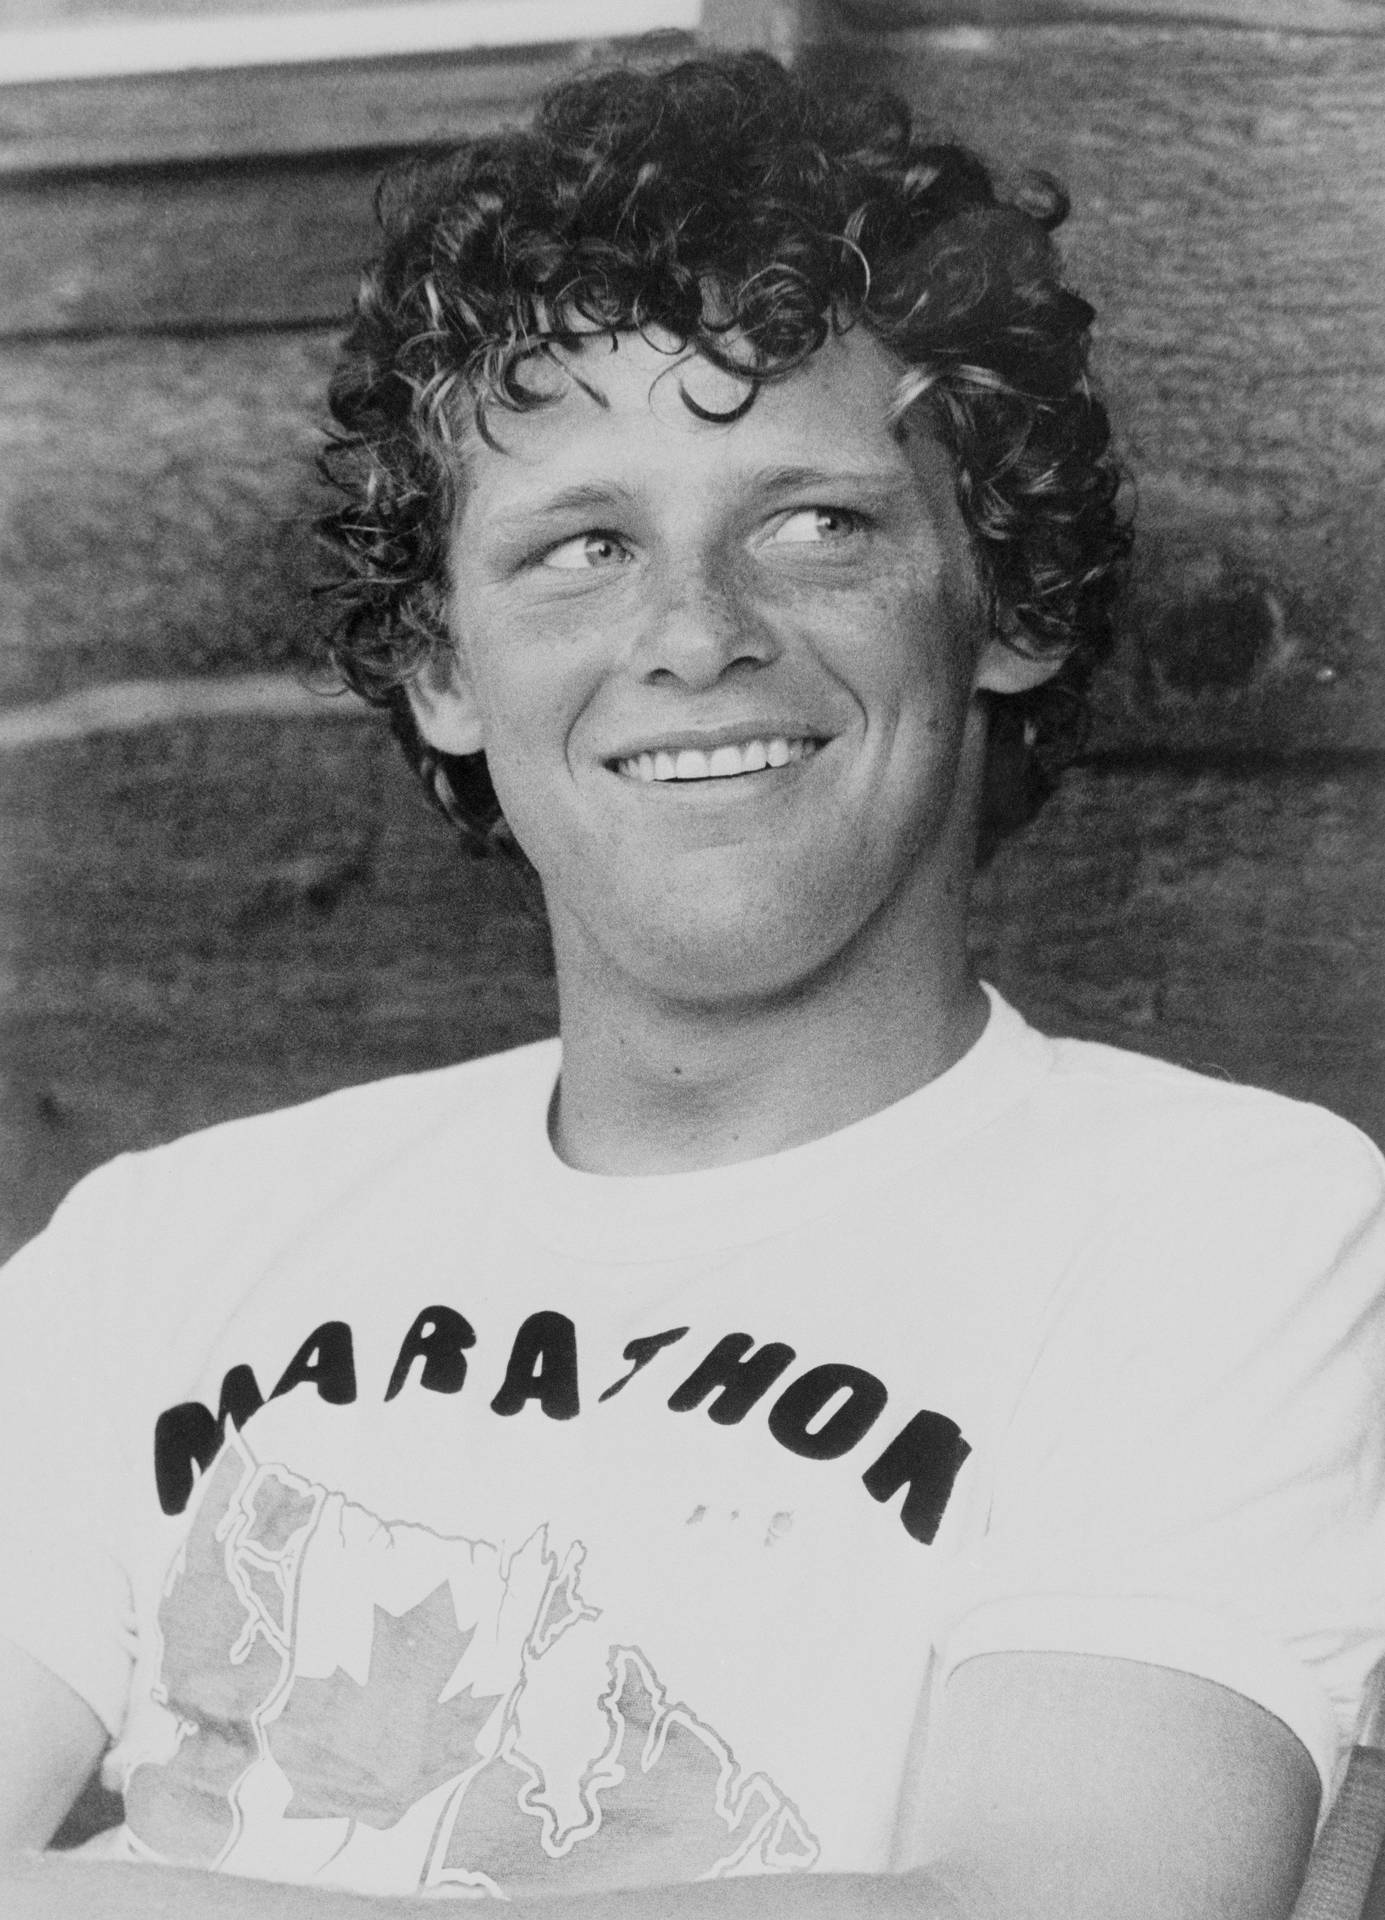 Canadian Athlete Terry Fox Background